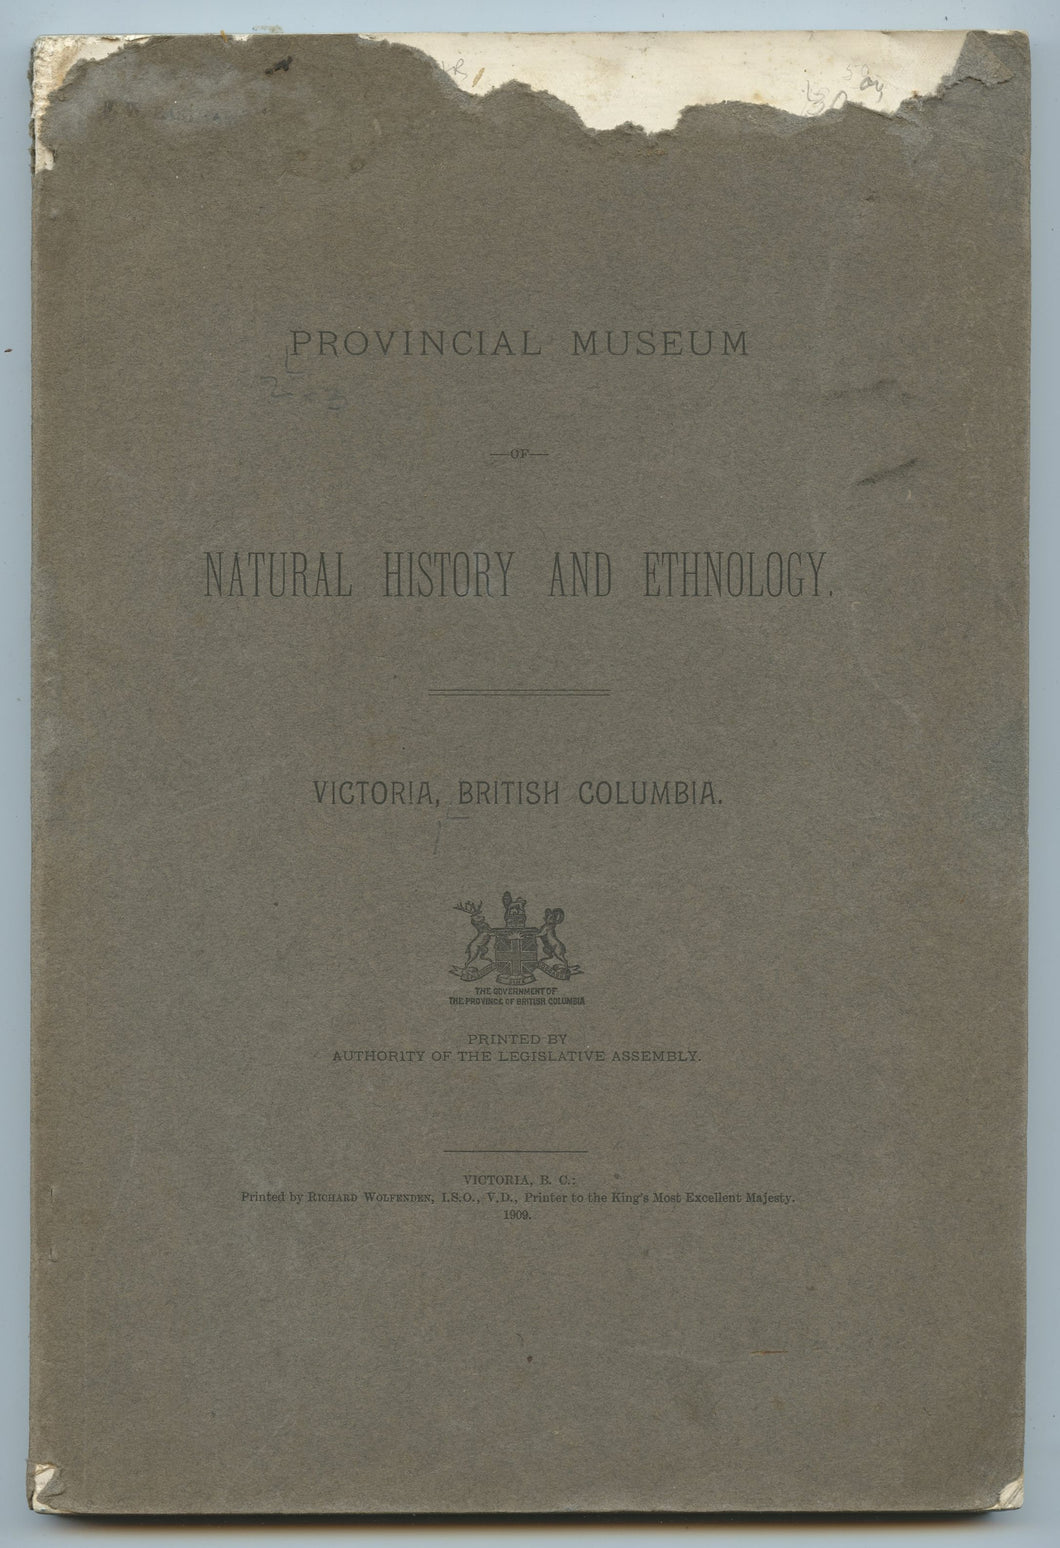 Provincial Museum of Natural History and Ethnology, Victoria, British Columbia